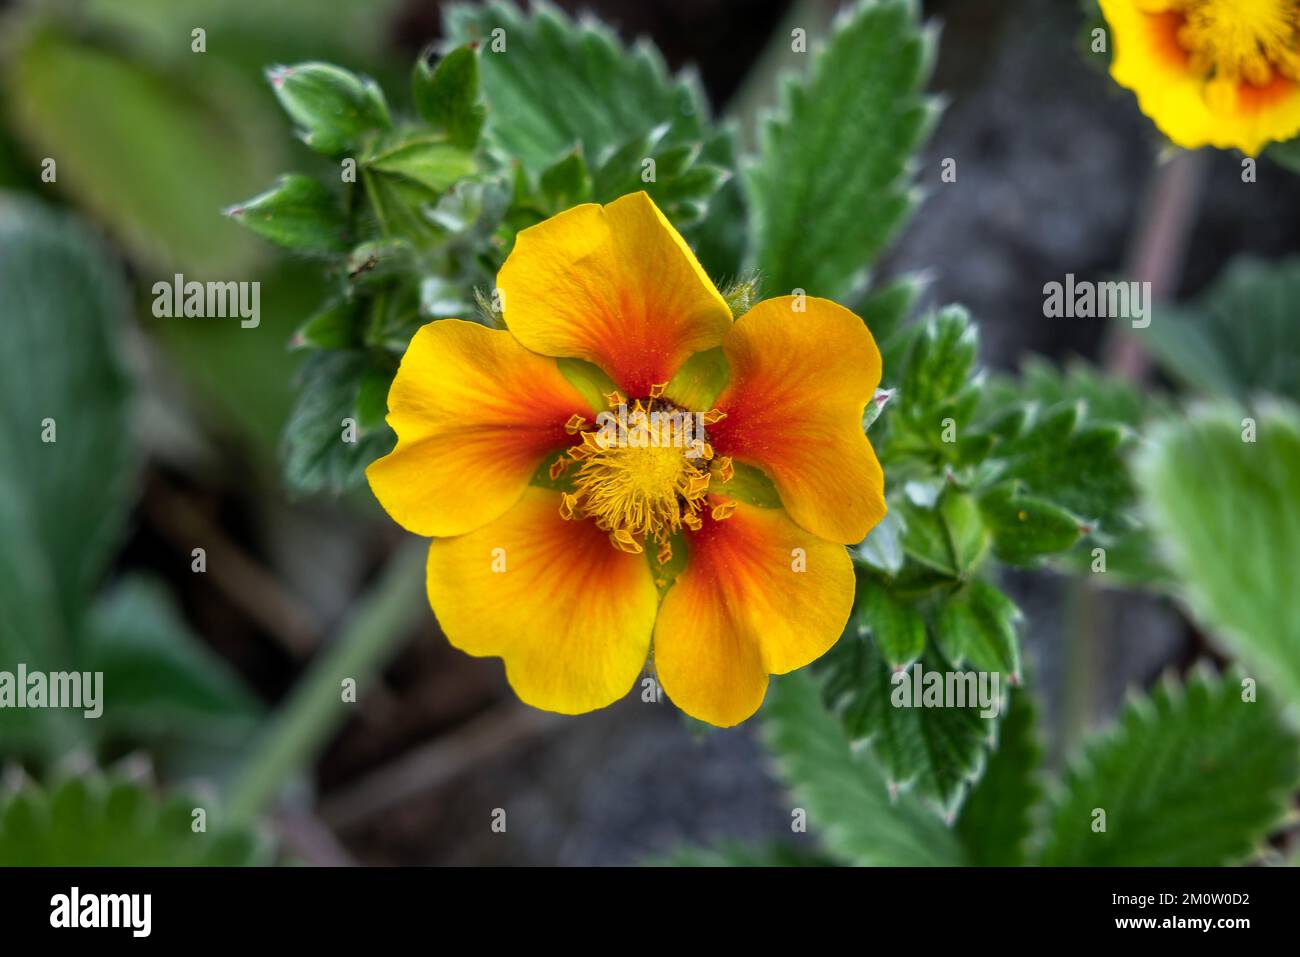 Potentilla argyrophylla a yellow orange summer flower plant commonly known as cinquefoil, stock photo image Stock Photo